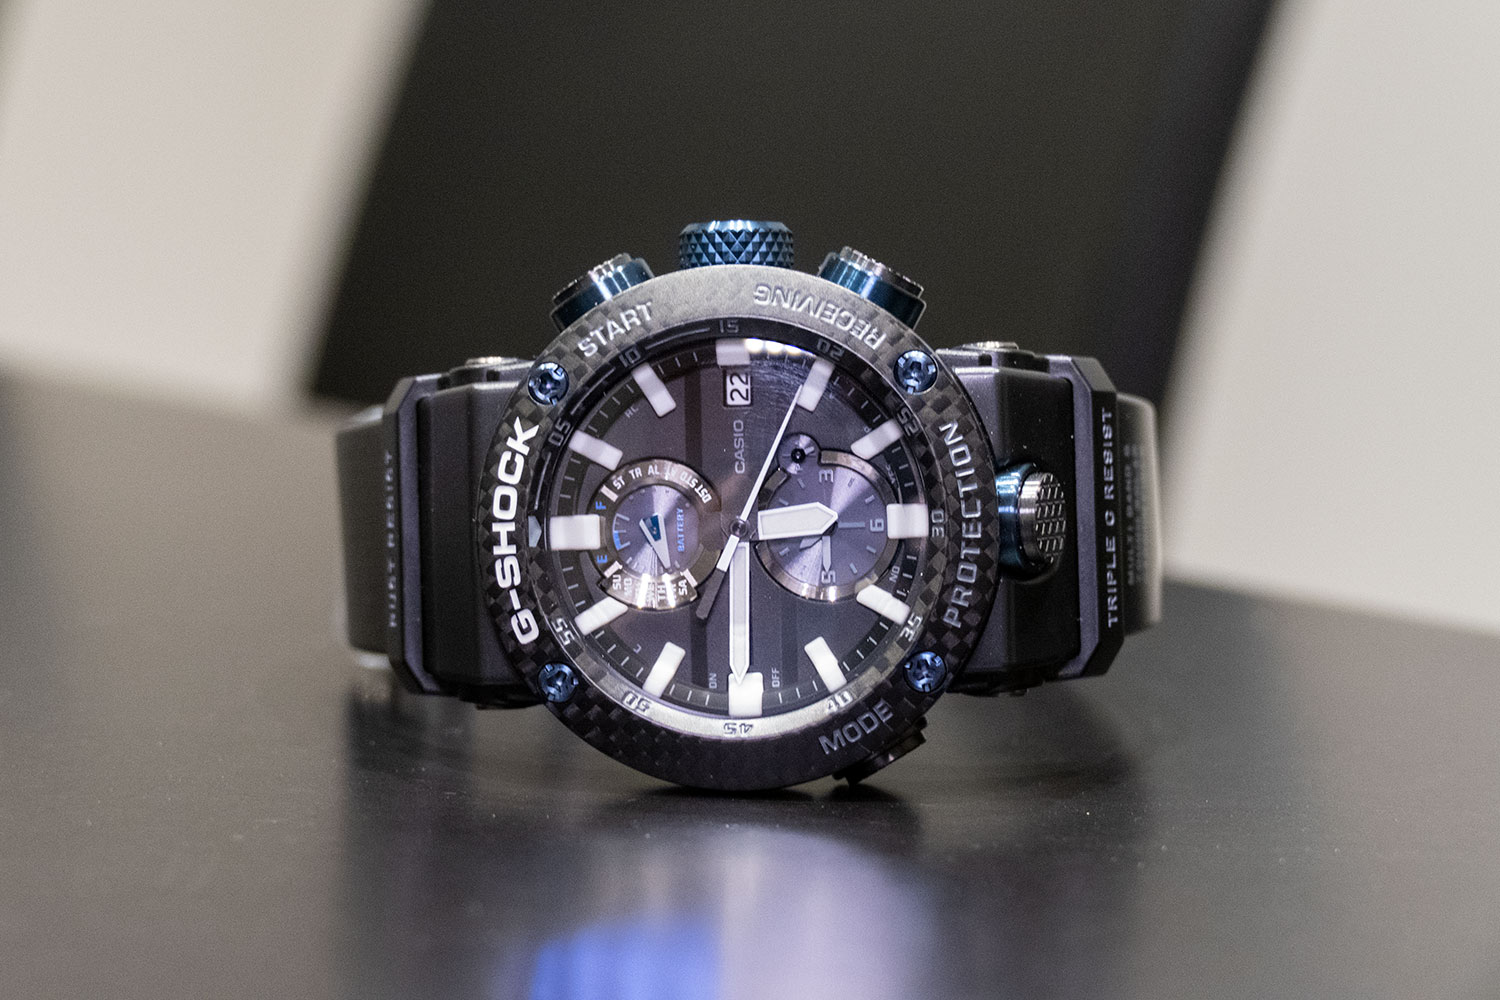 Casio Gravitymaster review